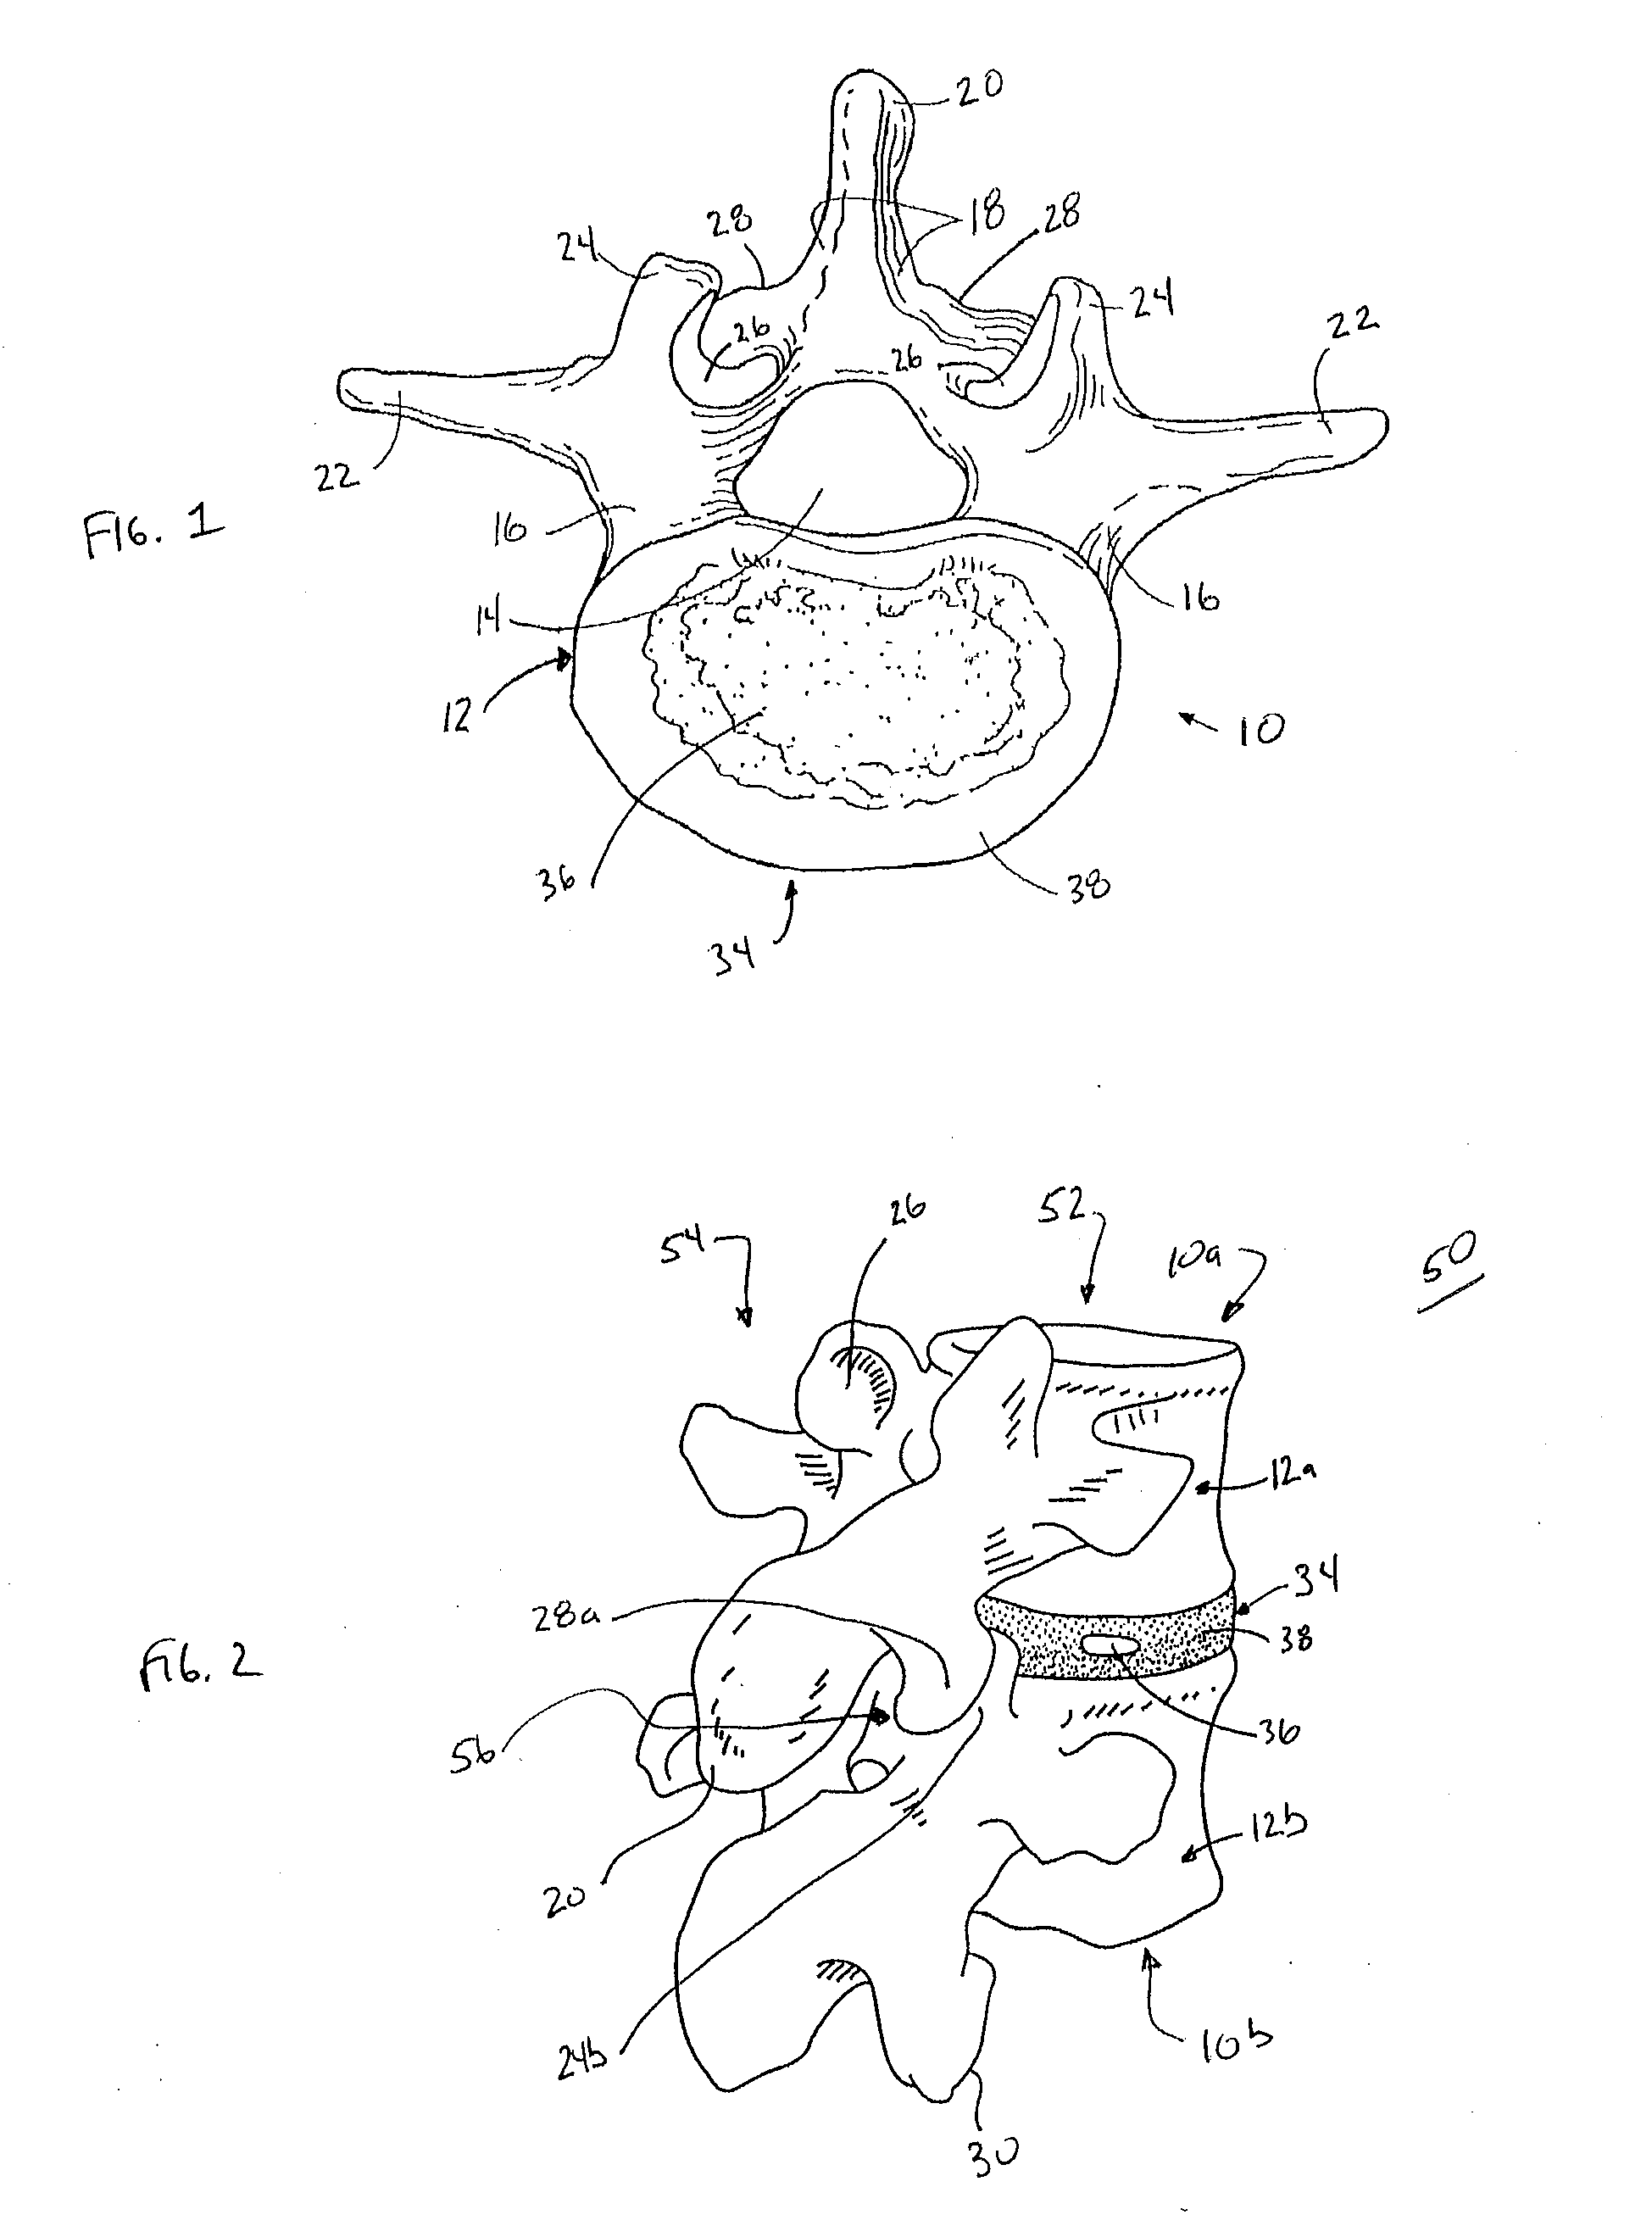 Systems and methods for stabilizing a functional spinal unit